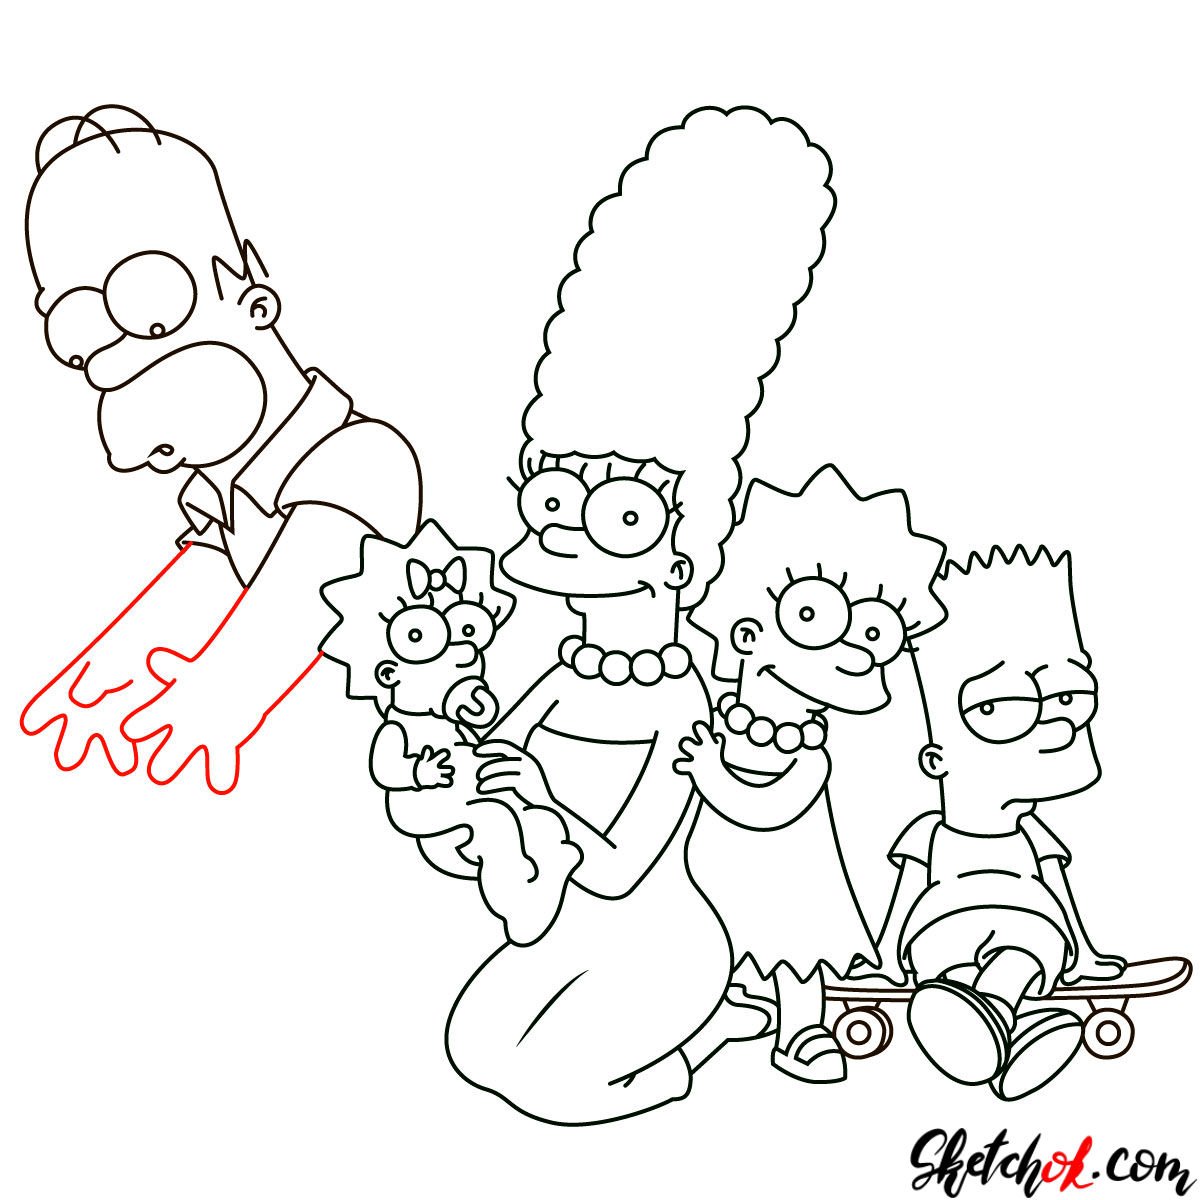 How to draw the Simpsons Family - step 27